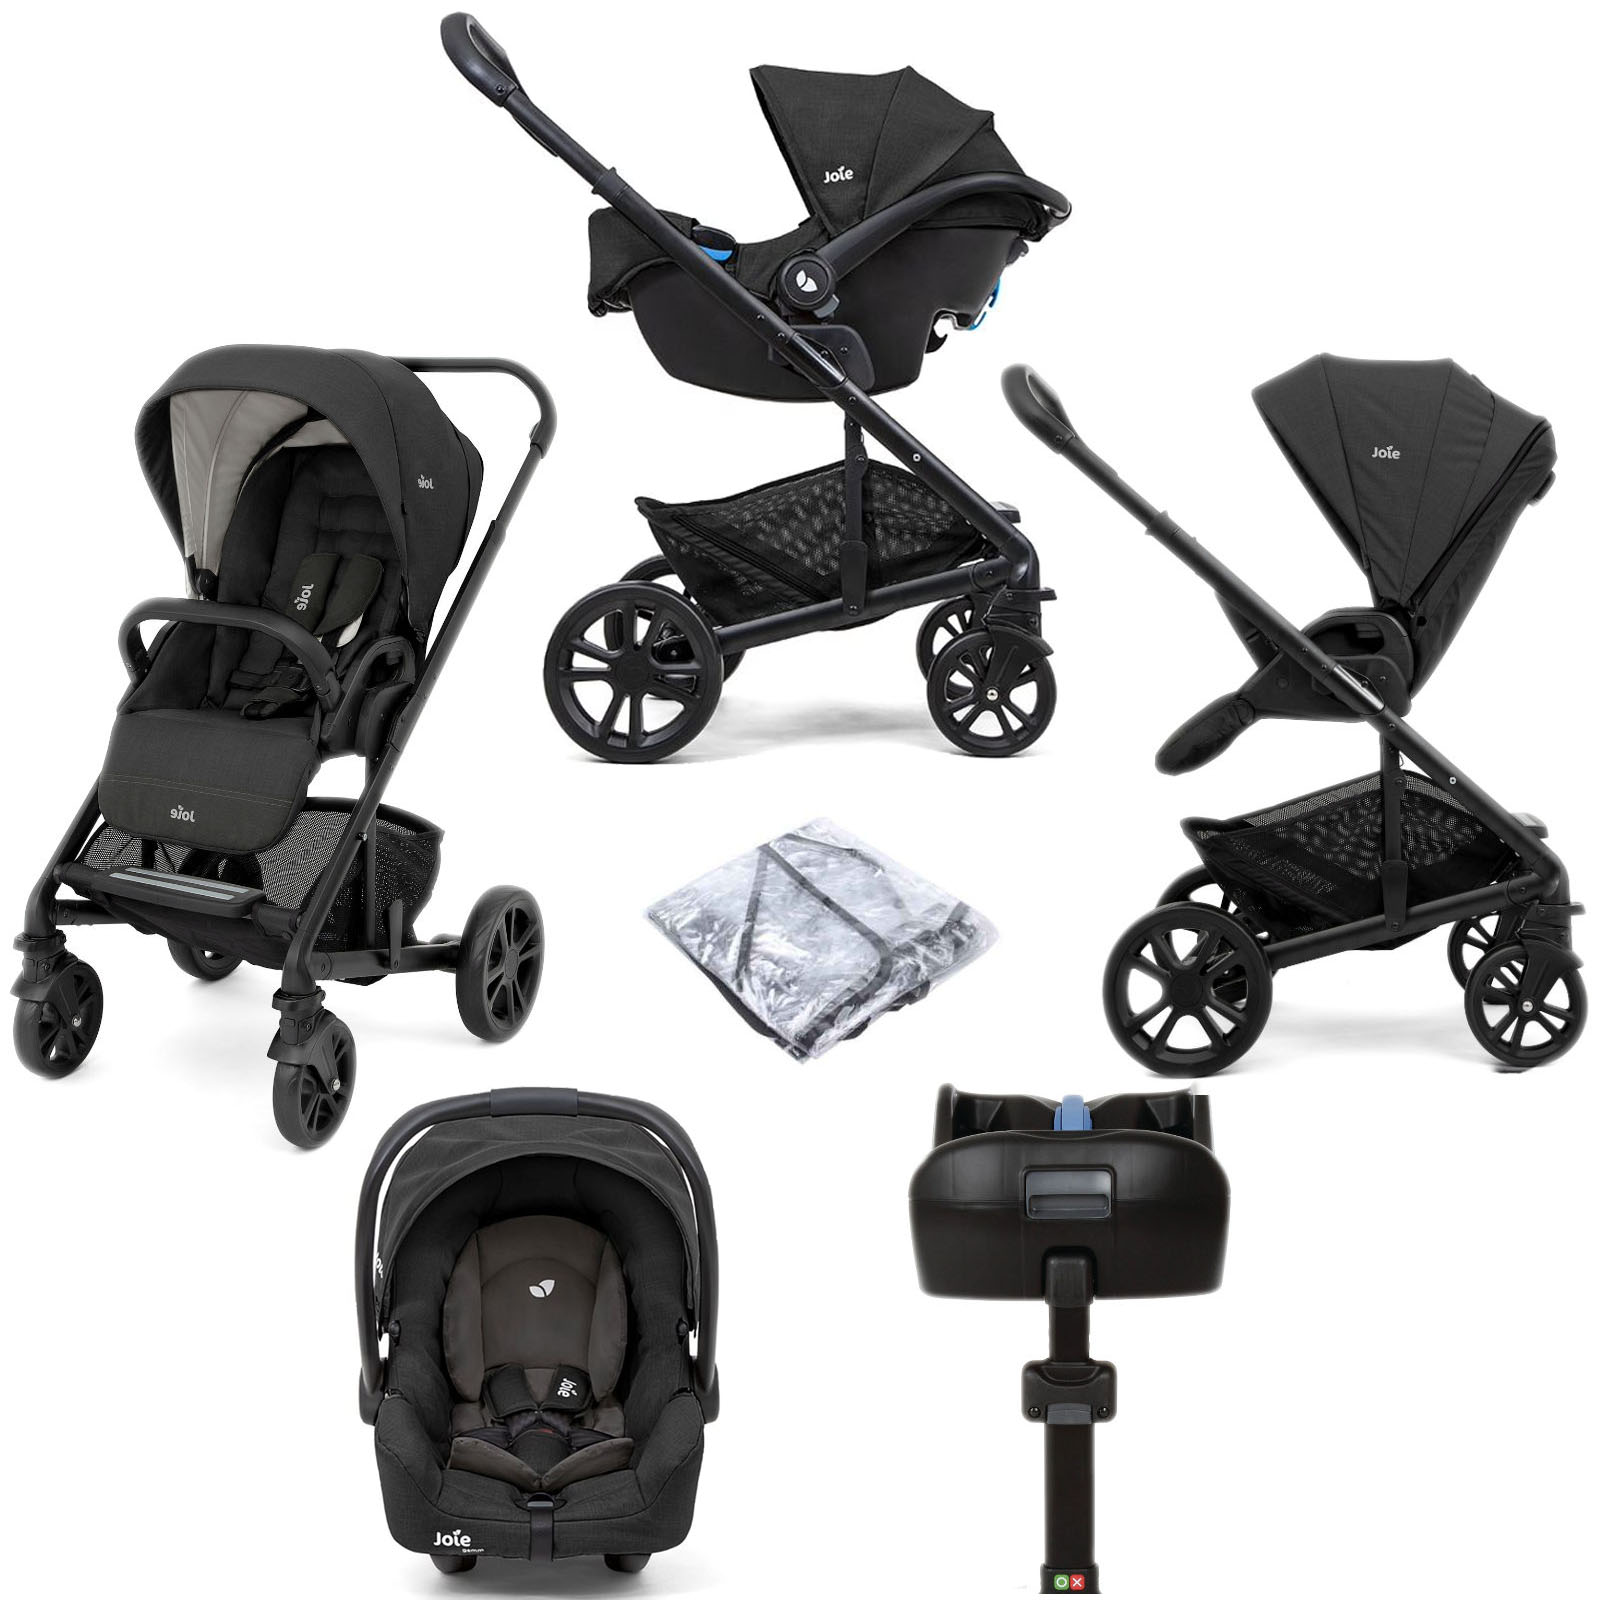 Joie Chrome (Gemm) Travel System with ISOFIX Base - Shale